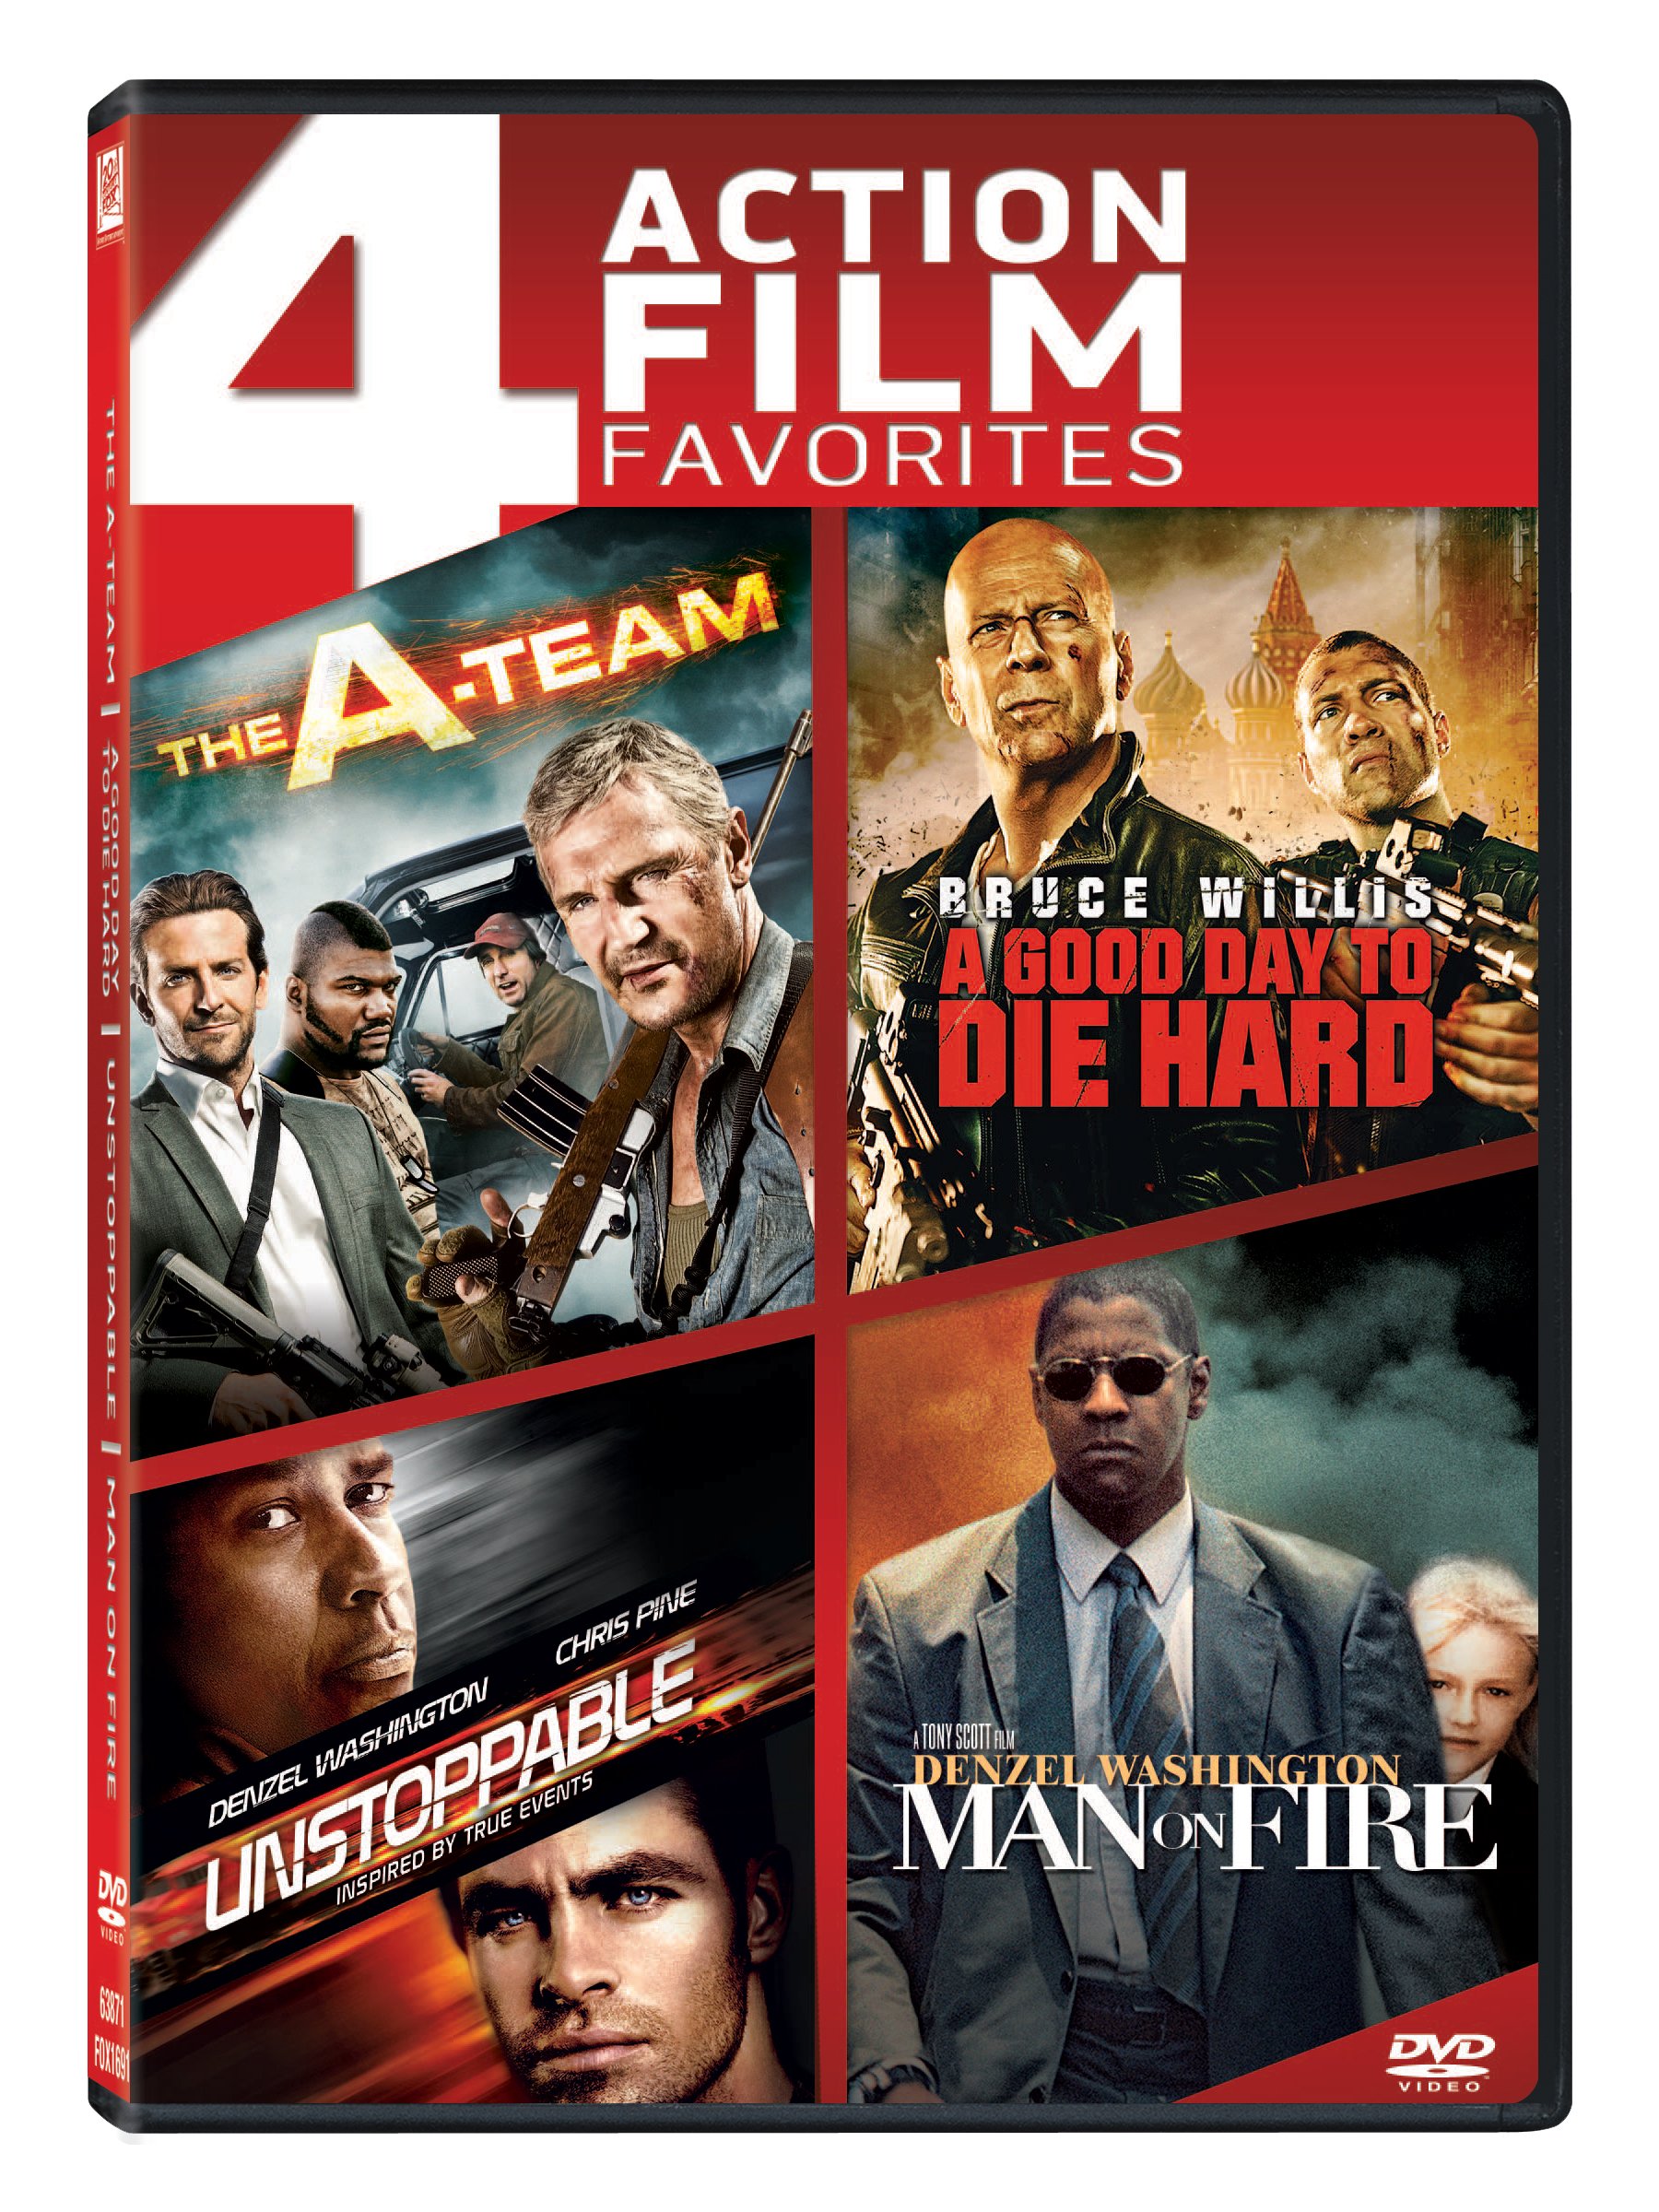 4-action-film-favorites-the-a-team-a-good-day-to-die-hard-unstoppable-man-on-fire-4-disc-box-set